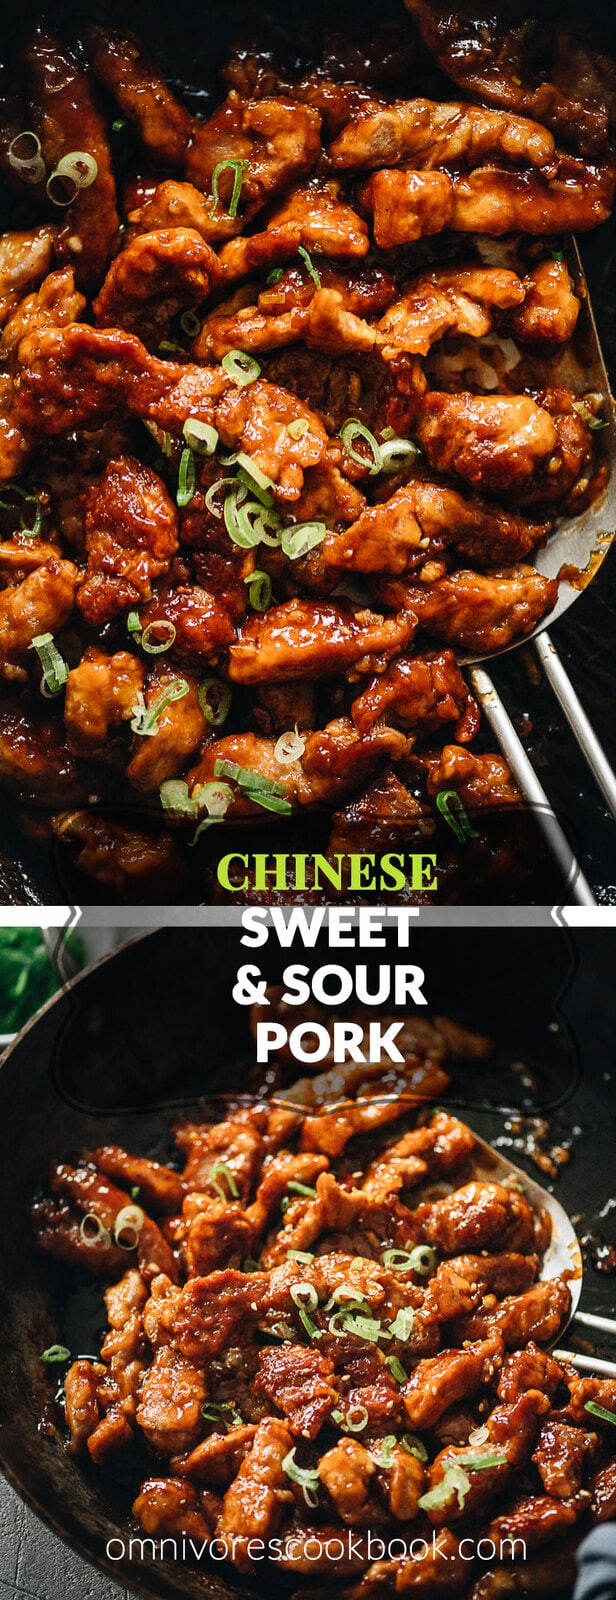 Sweet and Sour Pork (糖醋里脊) | Introducing the authentic Chinese sweet and sour pork made with lightly battered pork, pan-fried until crispy, juicy, and tender, then tossed in a fragrant sticky sauce with a perfectly balanced sweet and sour taste. It’s super easy to make and tastes way better than takeout! {Gluten-free Adaptable}